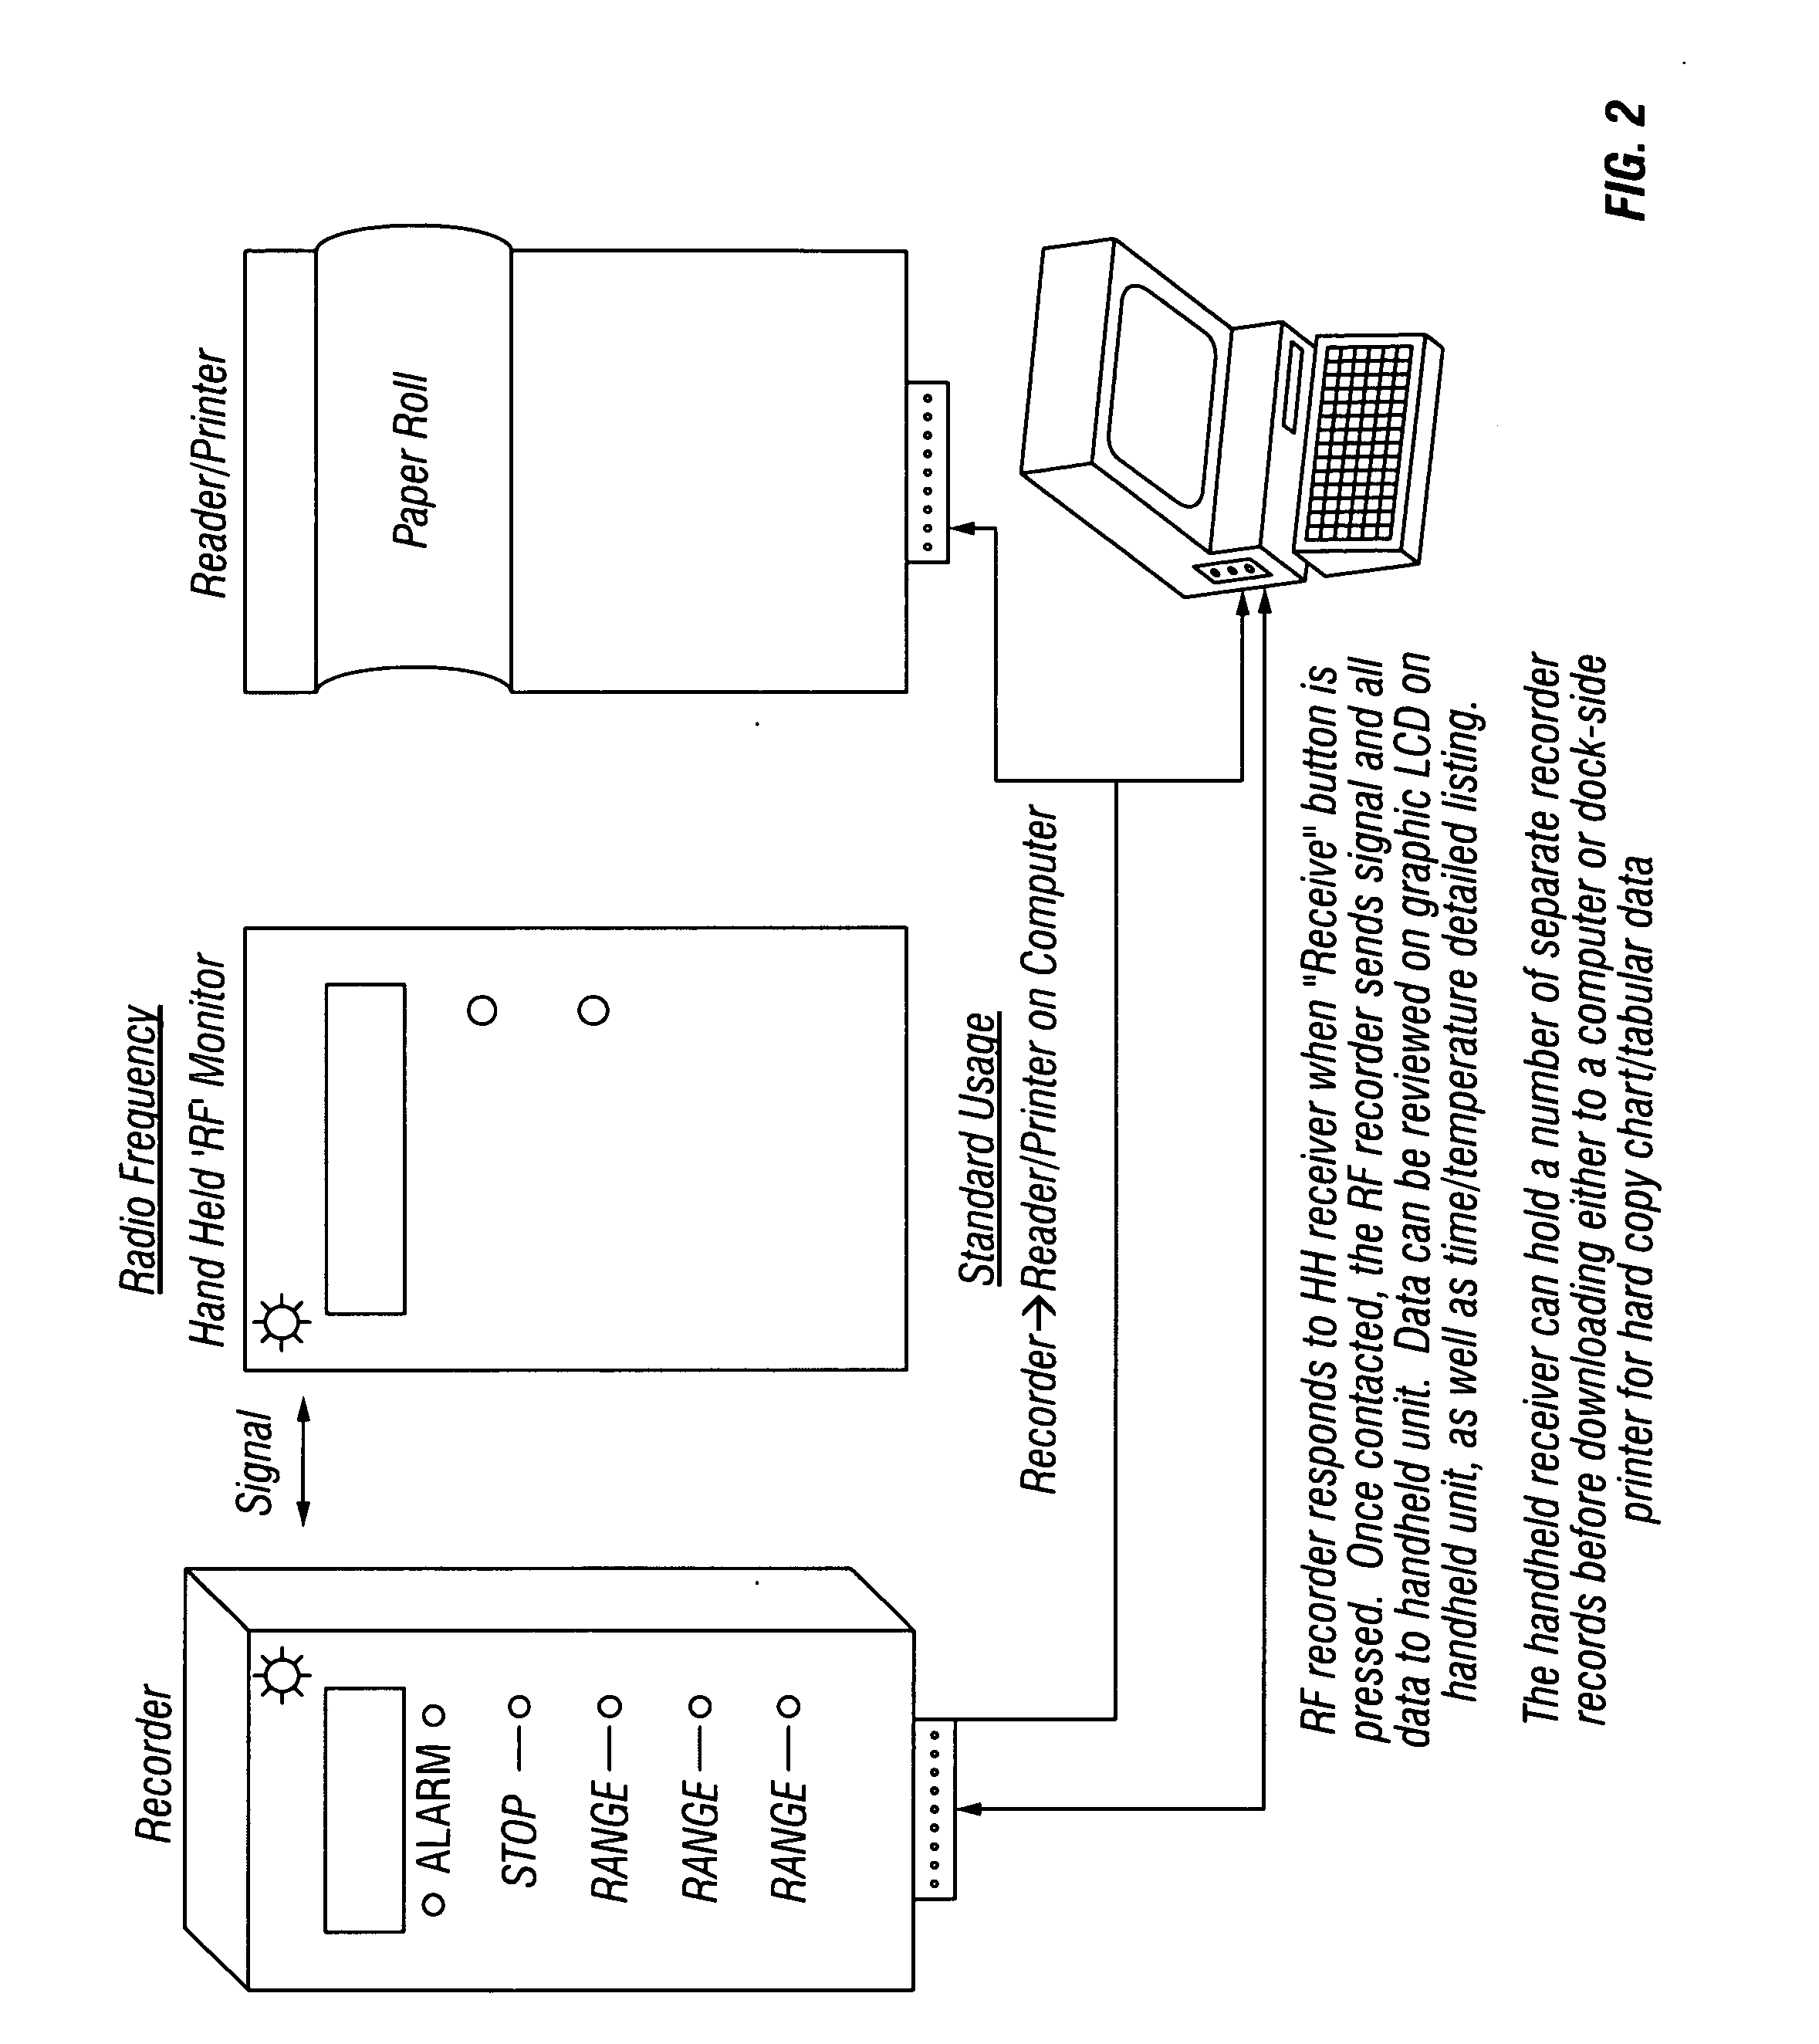 Temperature recording system having user selectable temperature ranges with radio frequency data transfer and G.P.S. based monitoring and communication capabilities